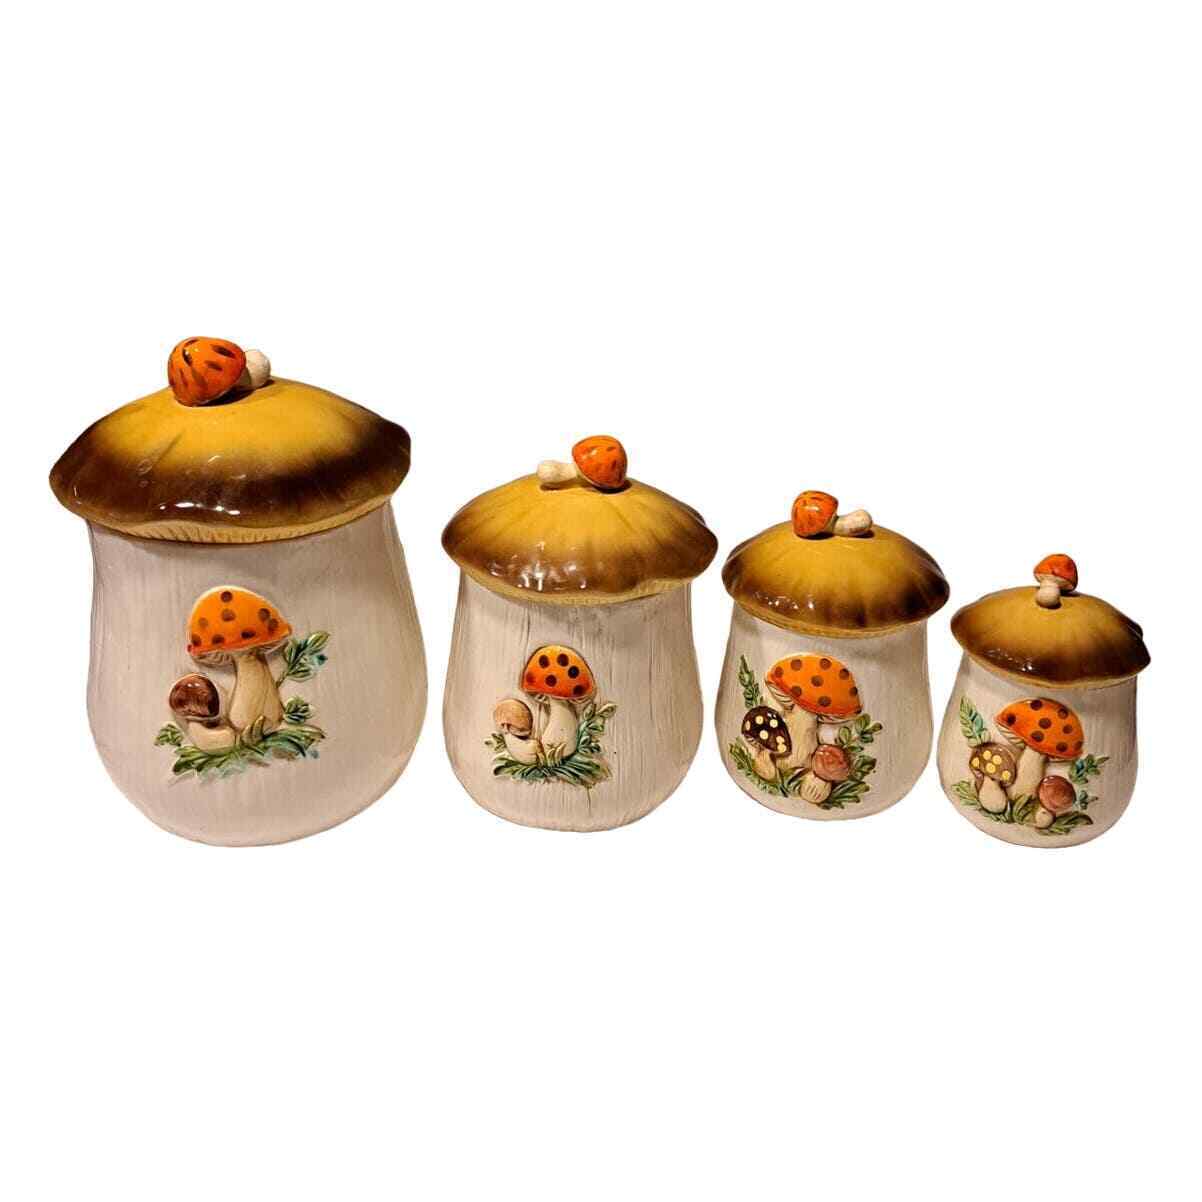 Vintage 1978 Sears & Roebuck Merry Mushroom 4 Piece Canister Set With Lids Retro